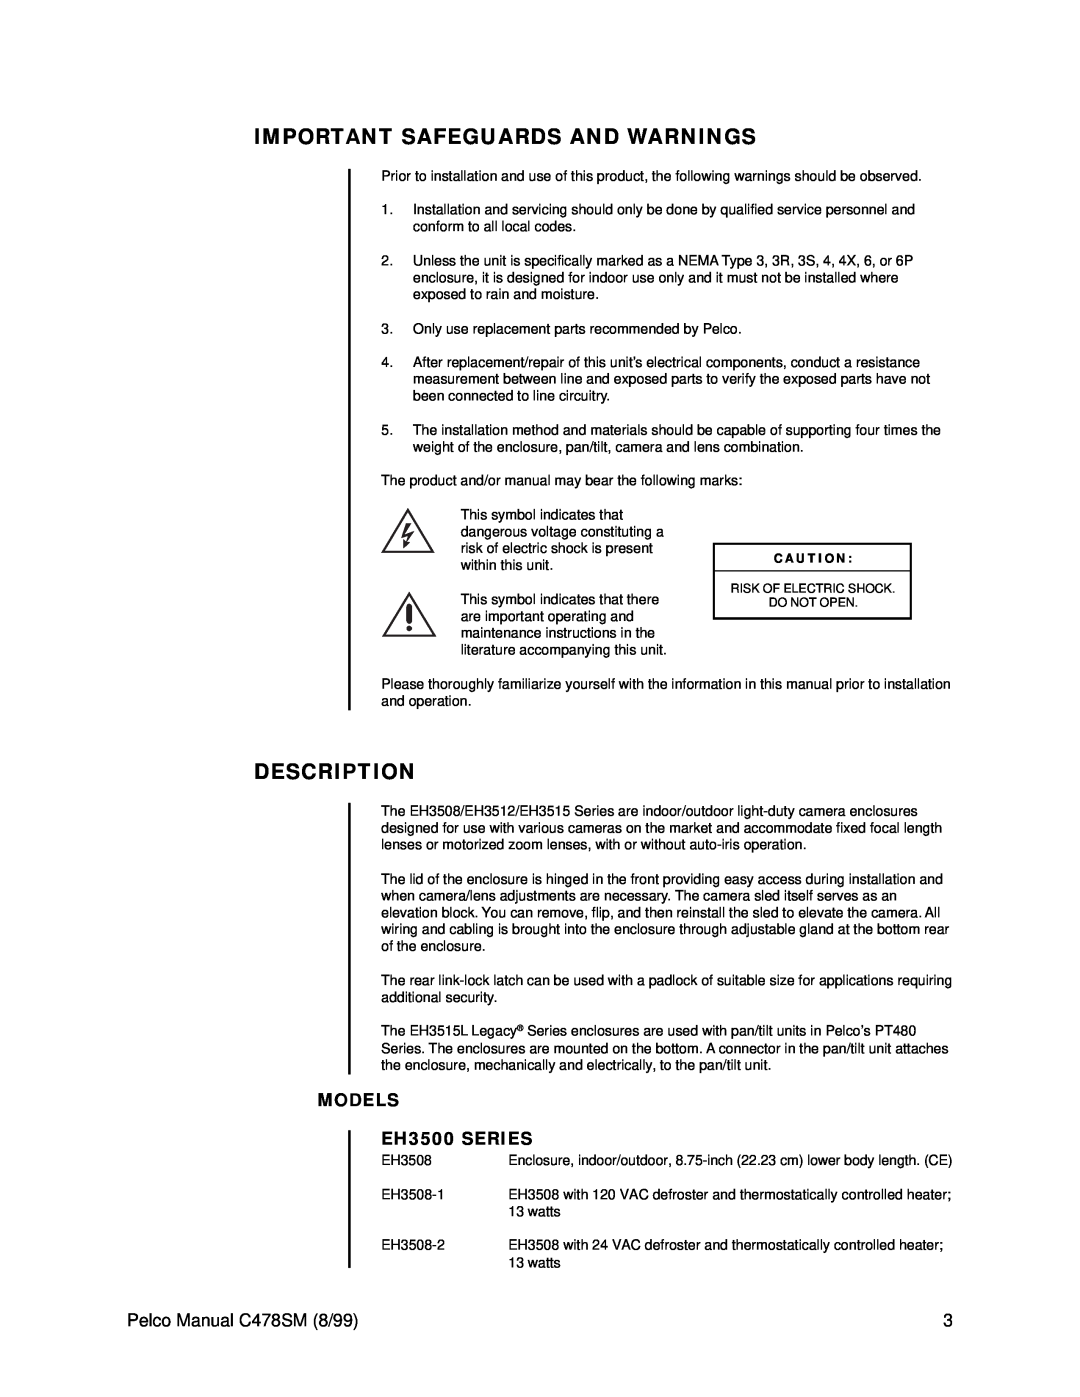 Pelco service manual Important Safeguards And Warnings, Description, MODELS EH3500 SERIES, Pelco Manual C478SM 8/99 